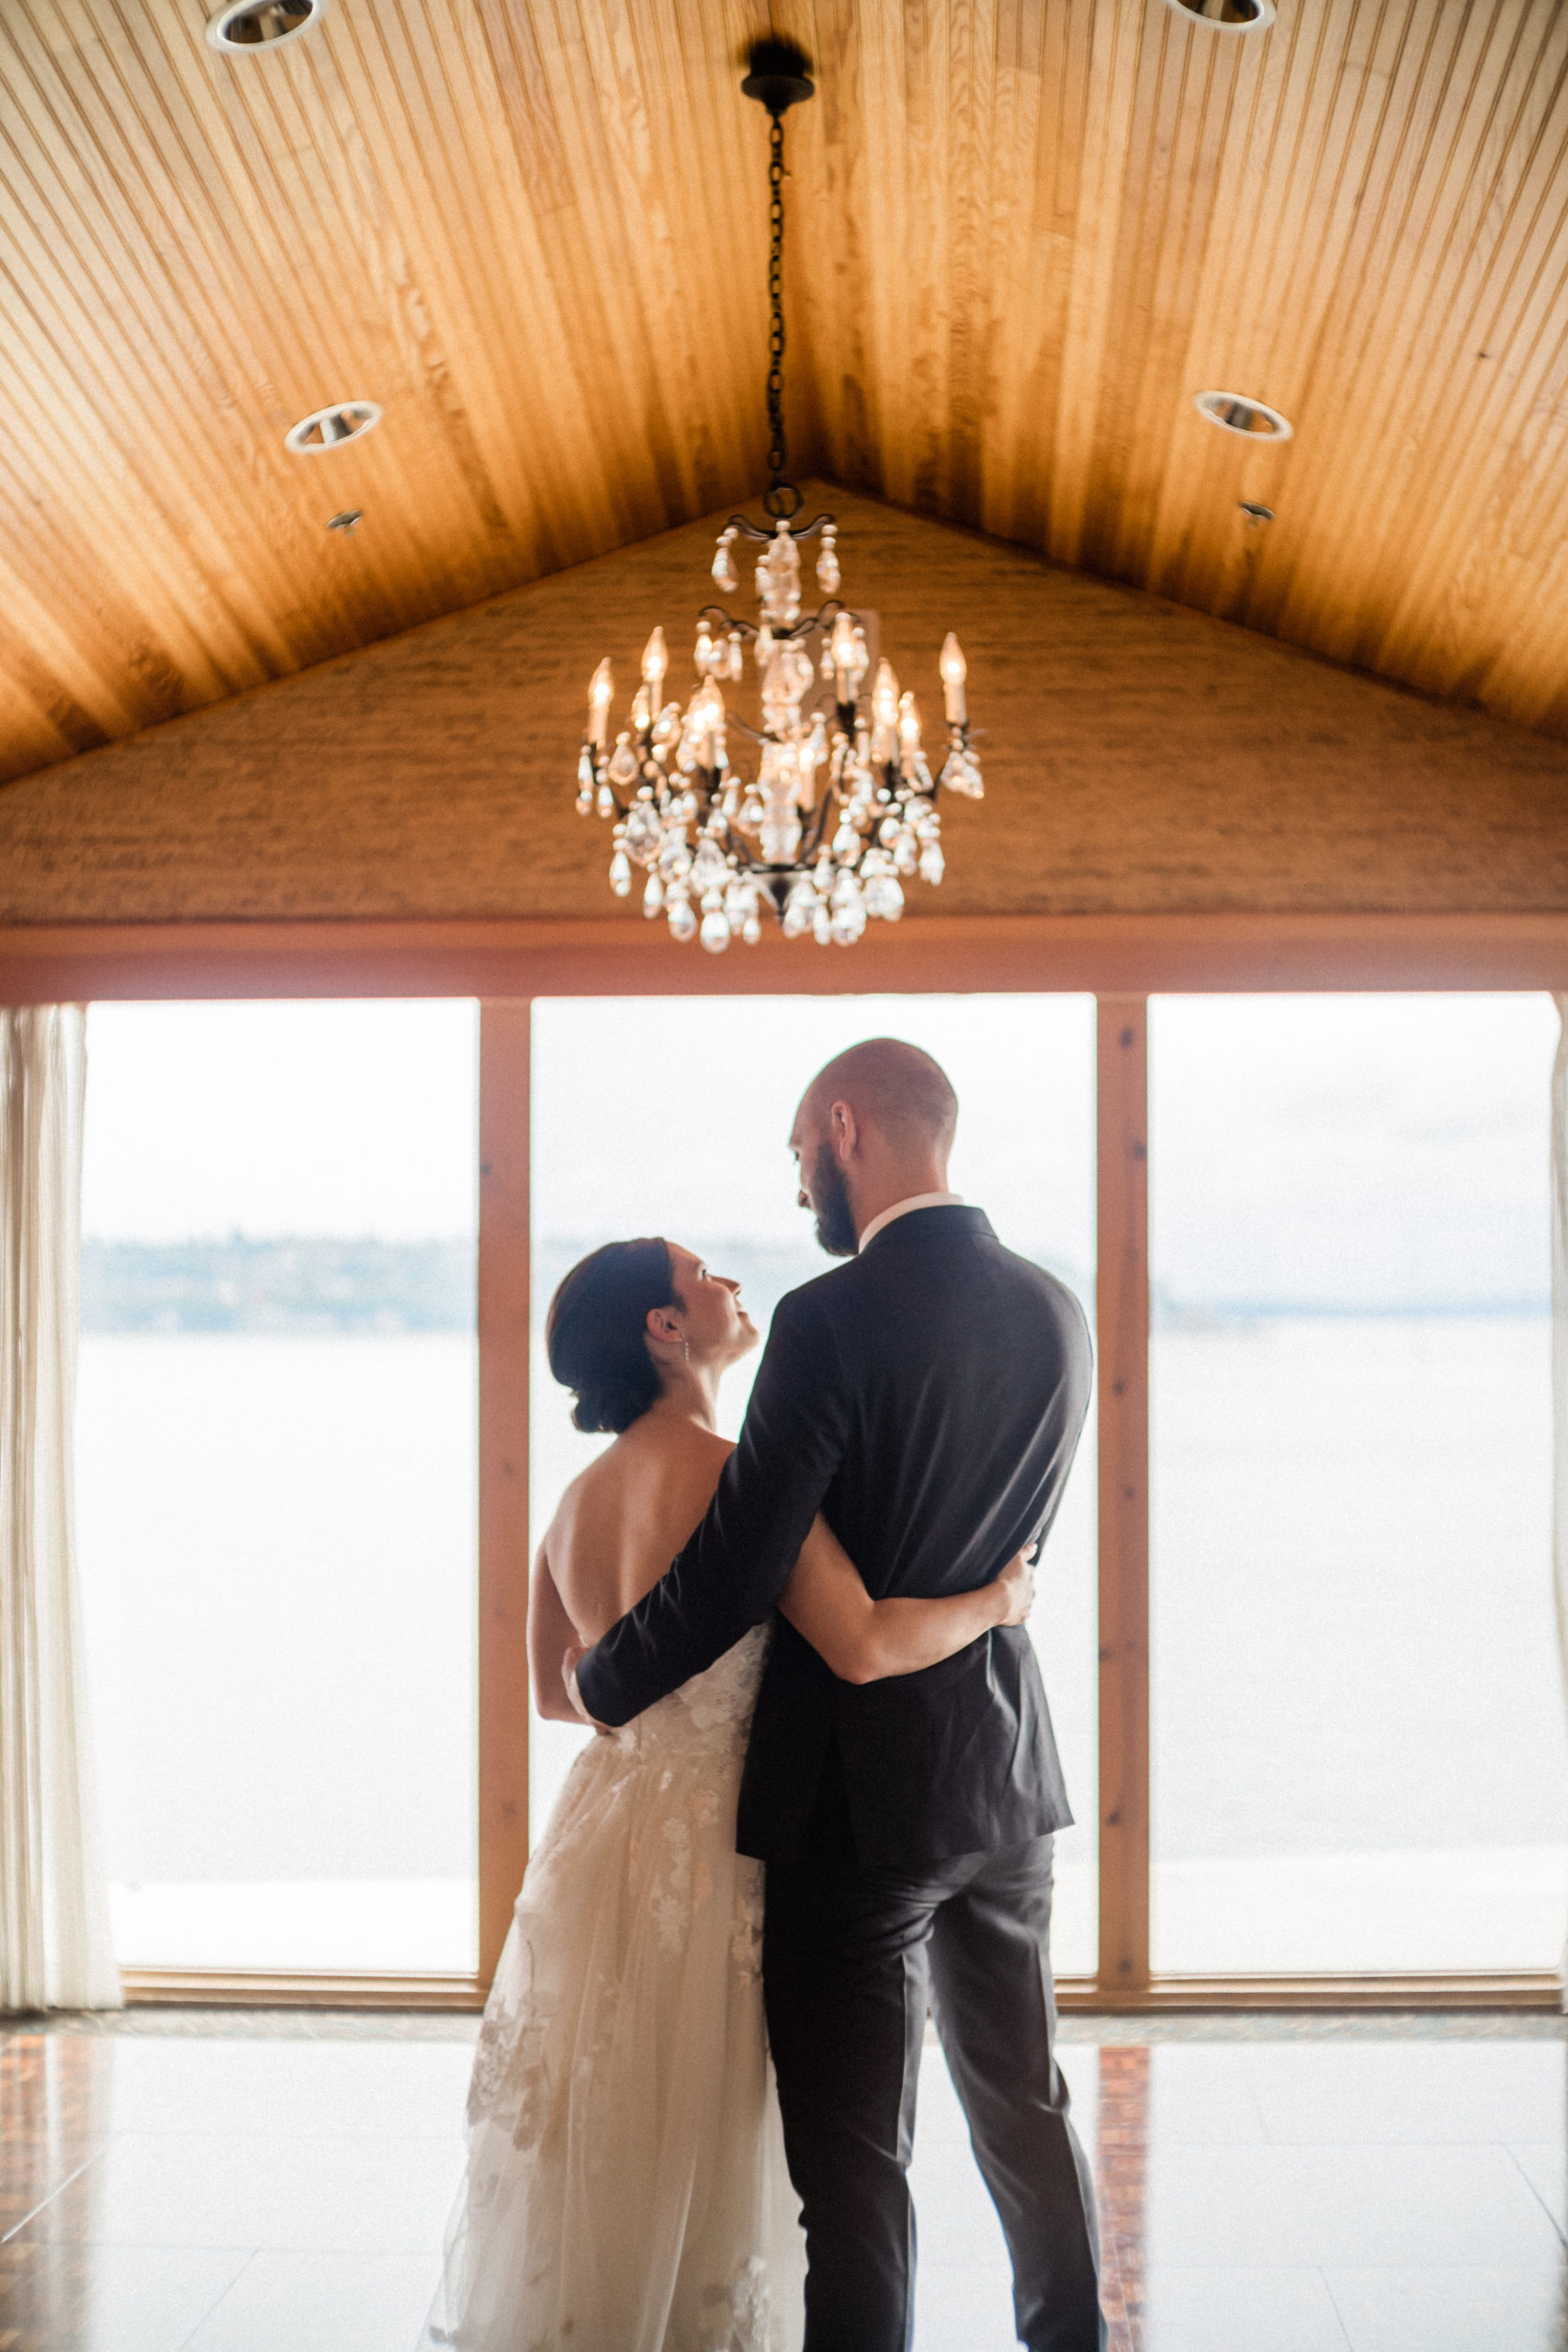 Couple standing in a hotel ballroom with chandelier over their heads.